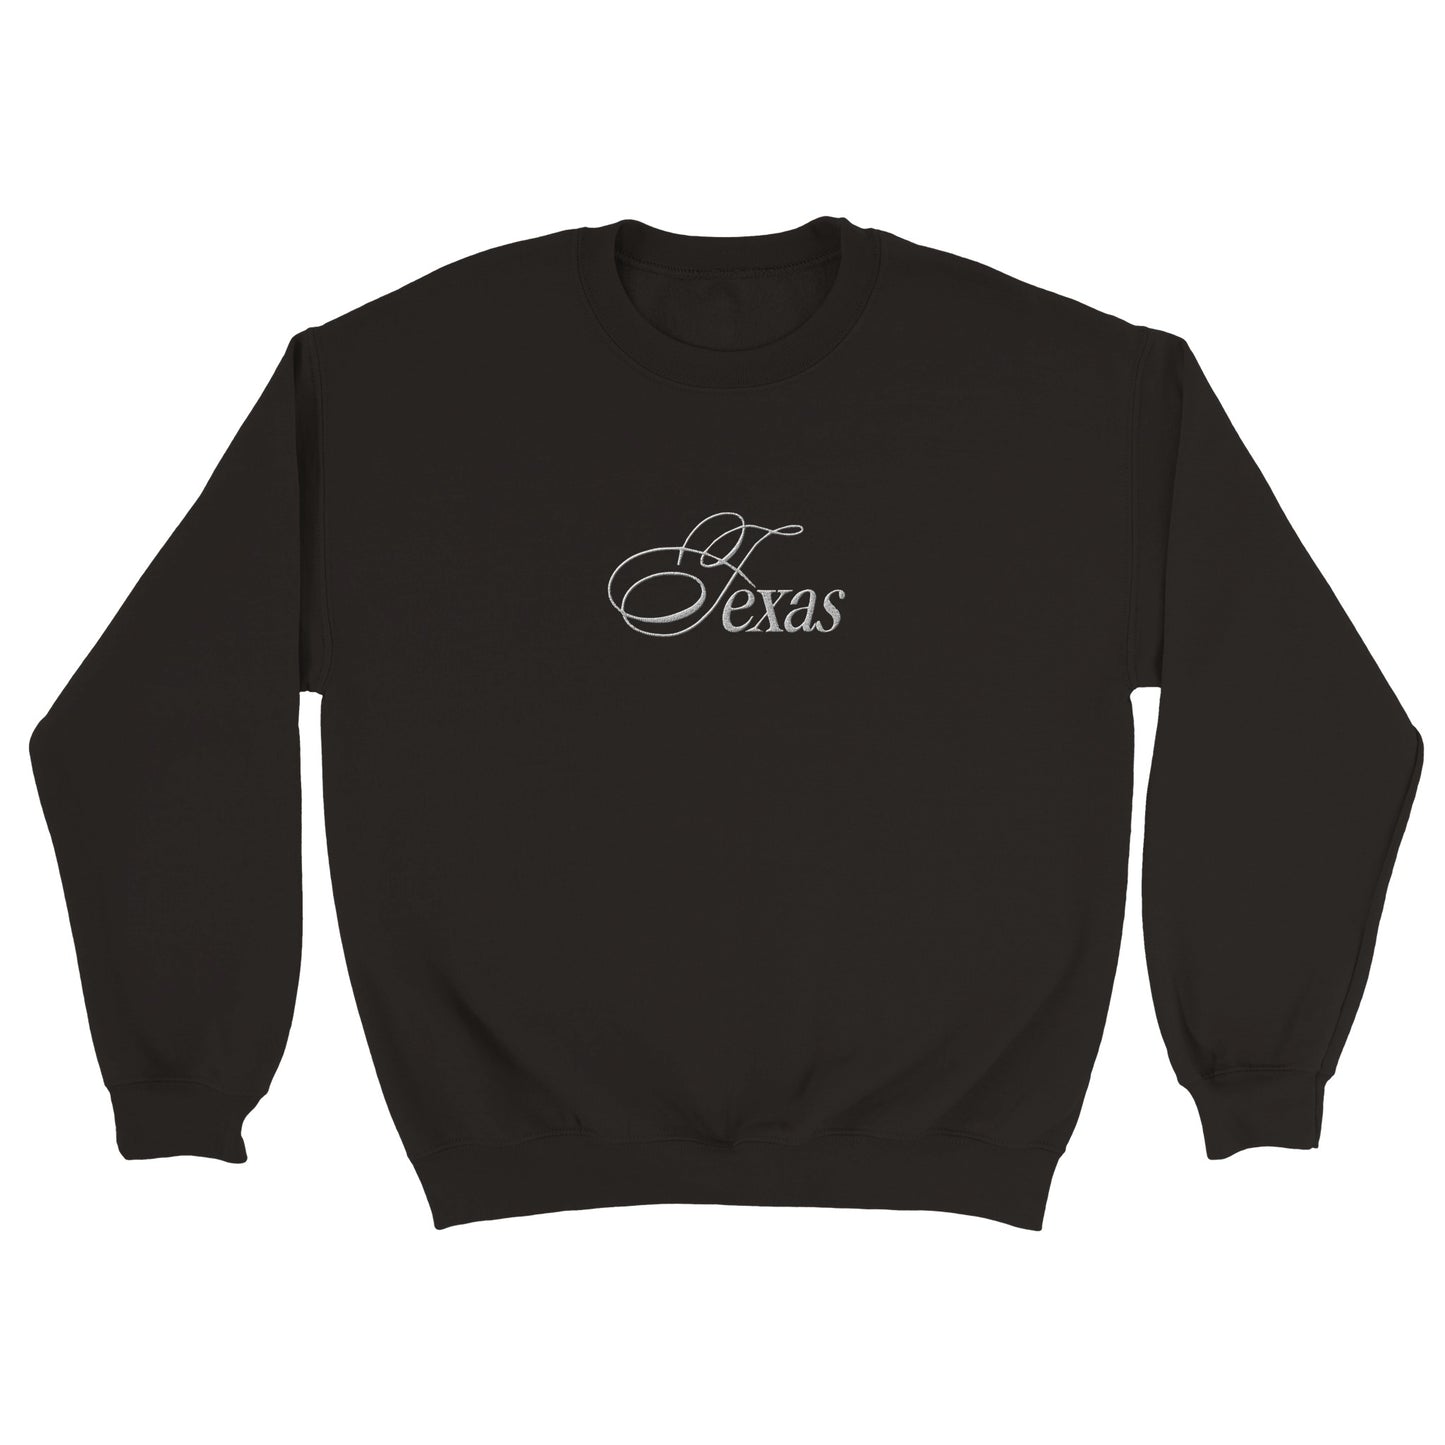 a black sweatshirt with embroidered text Texas in serif font